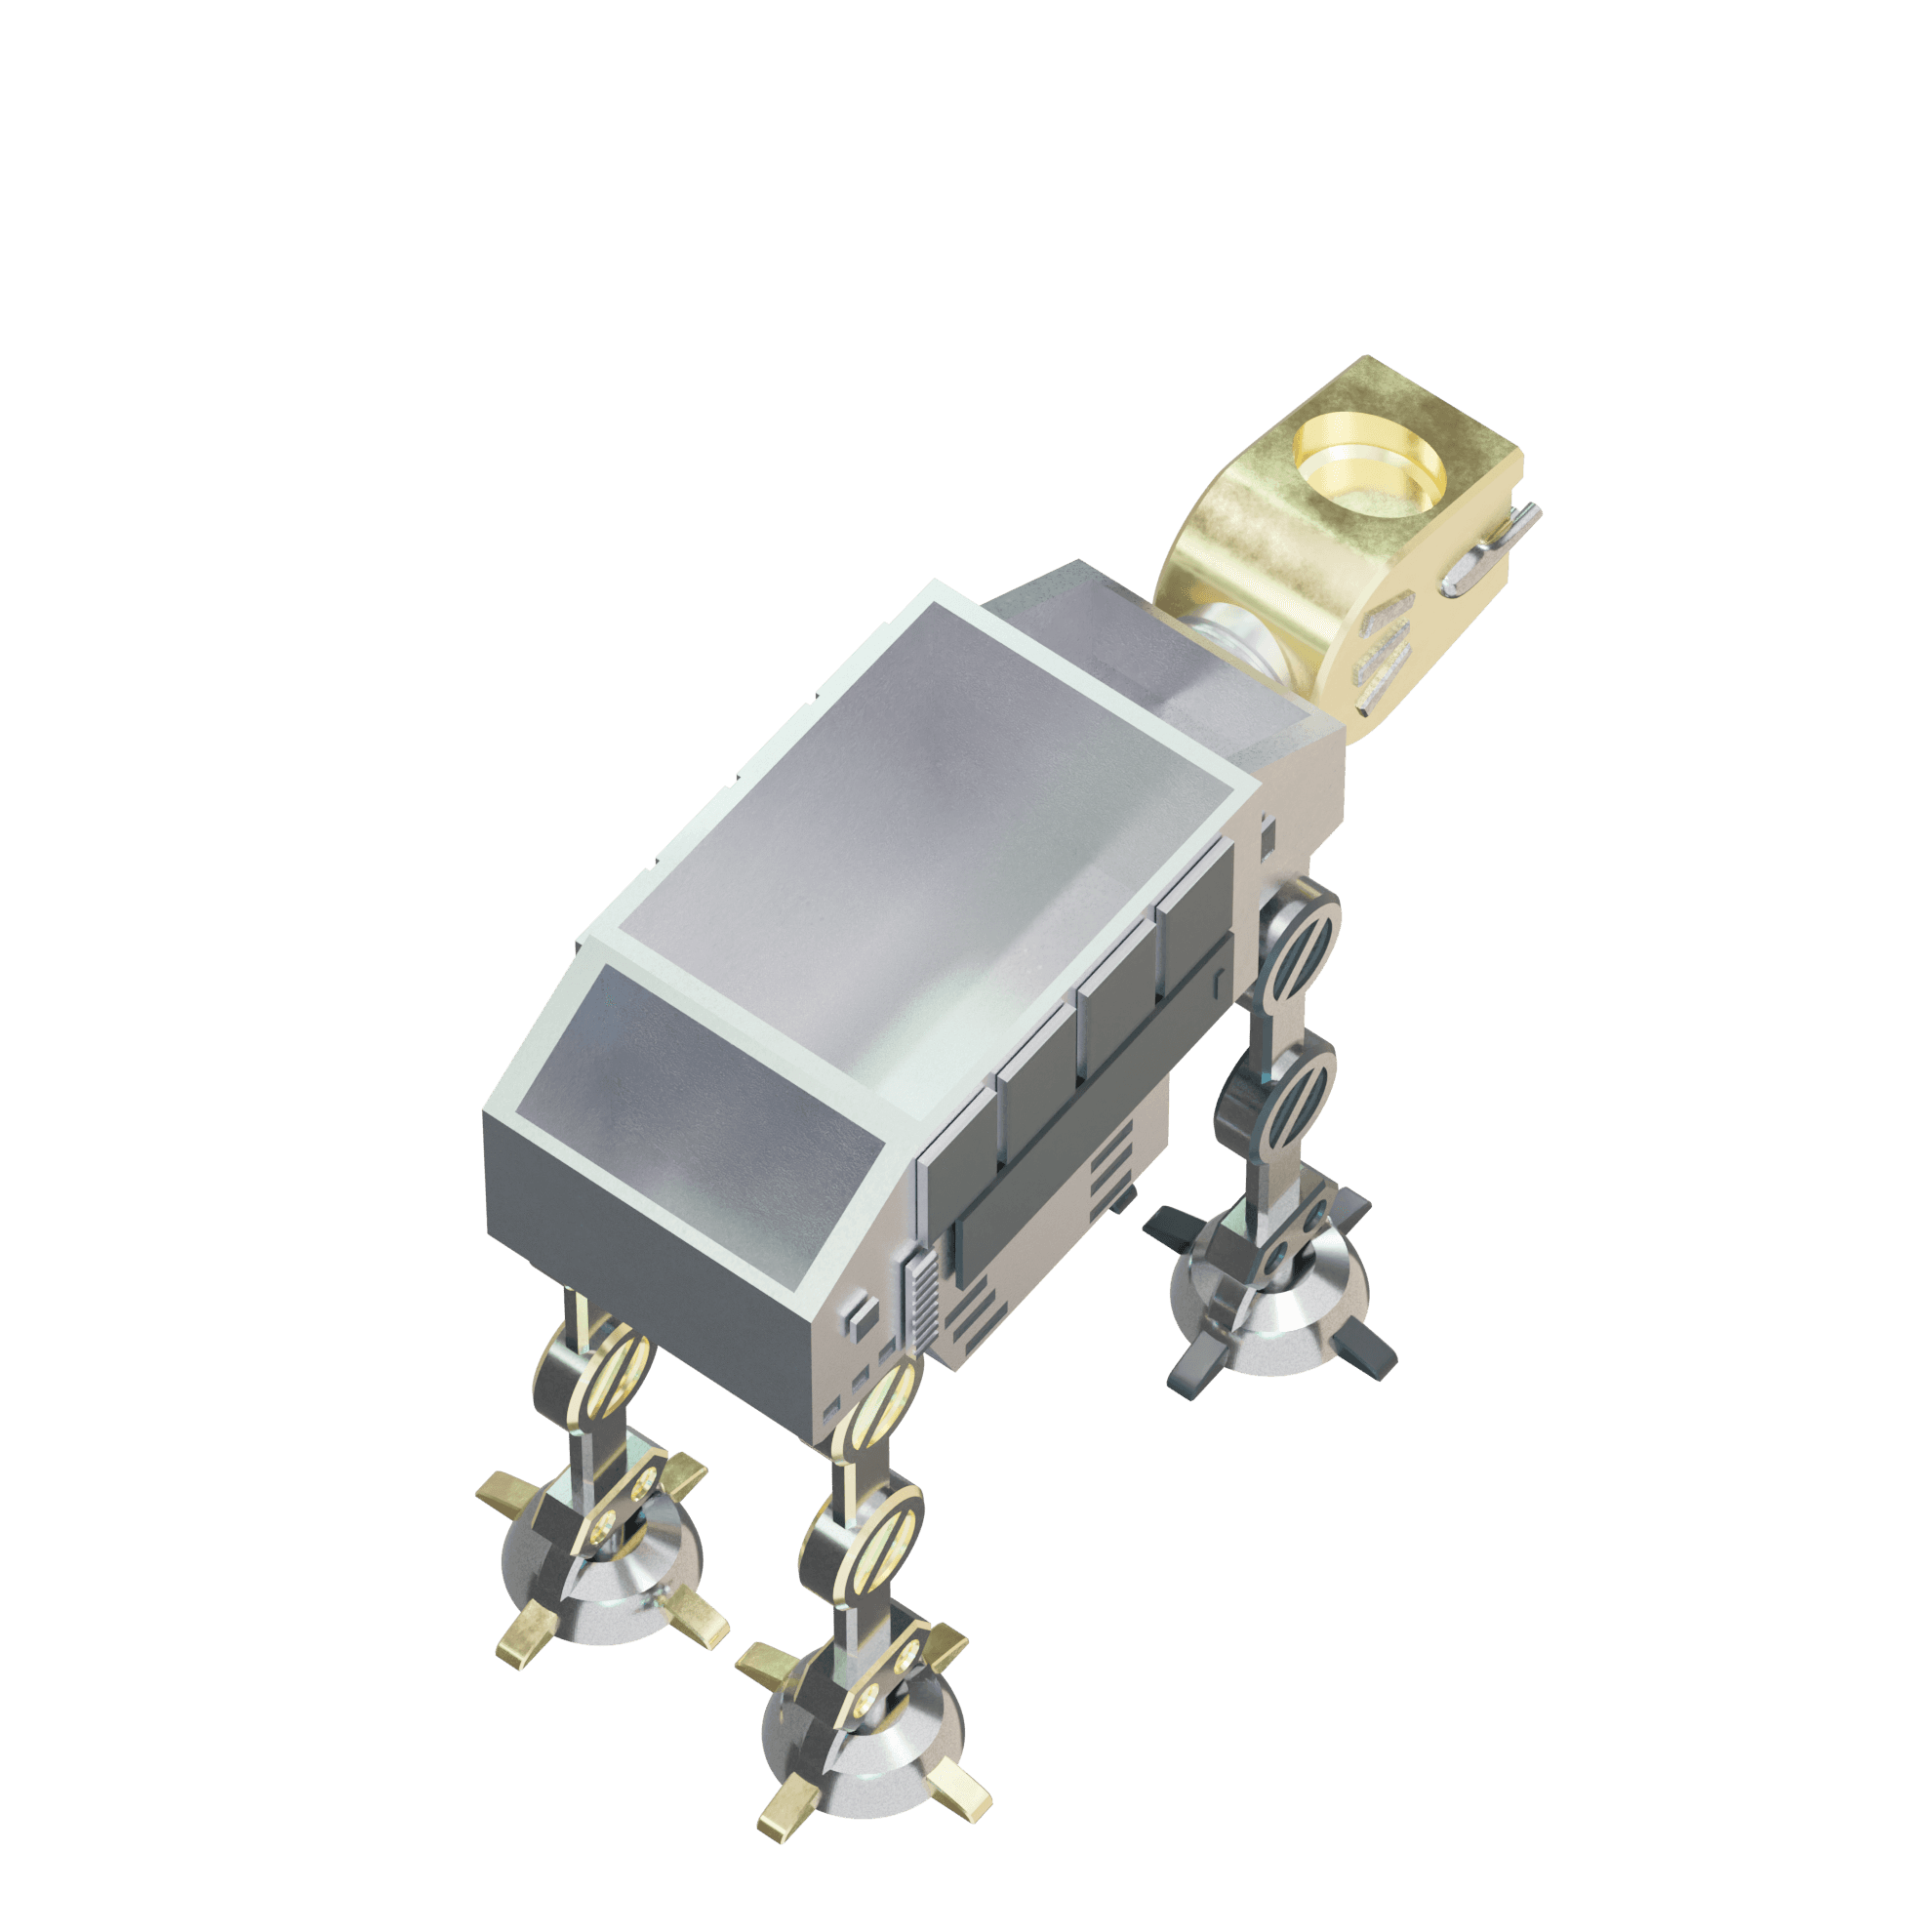 AT-AT Walker Chair Caddy 3d model